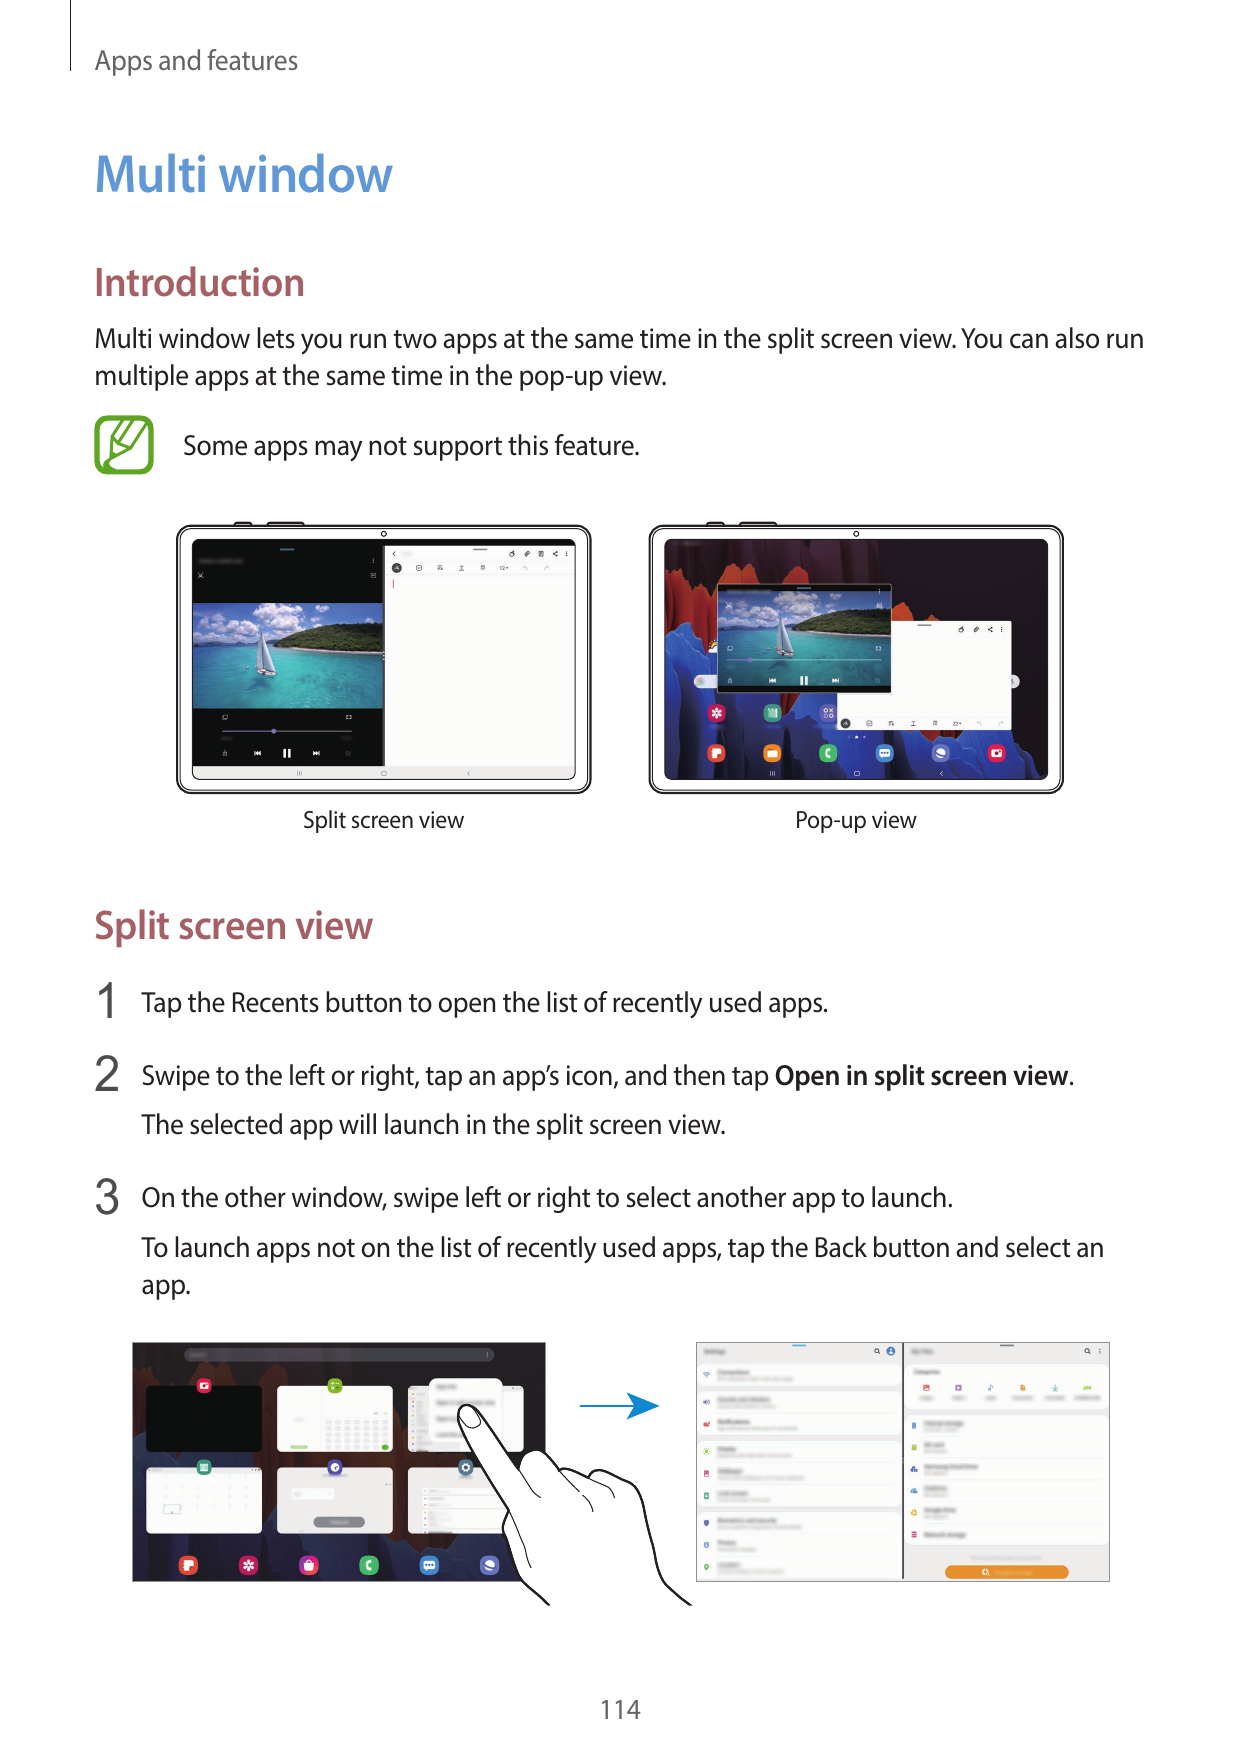 Apps and featuresMulti windowIntroductionMulti window lets you run two apps at the same time in the split screen view. You can a